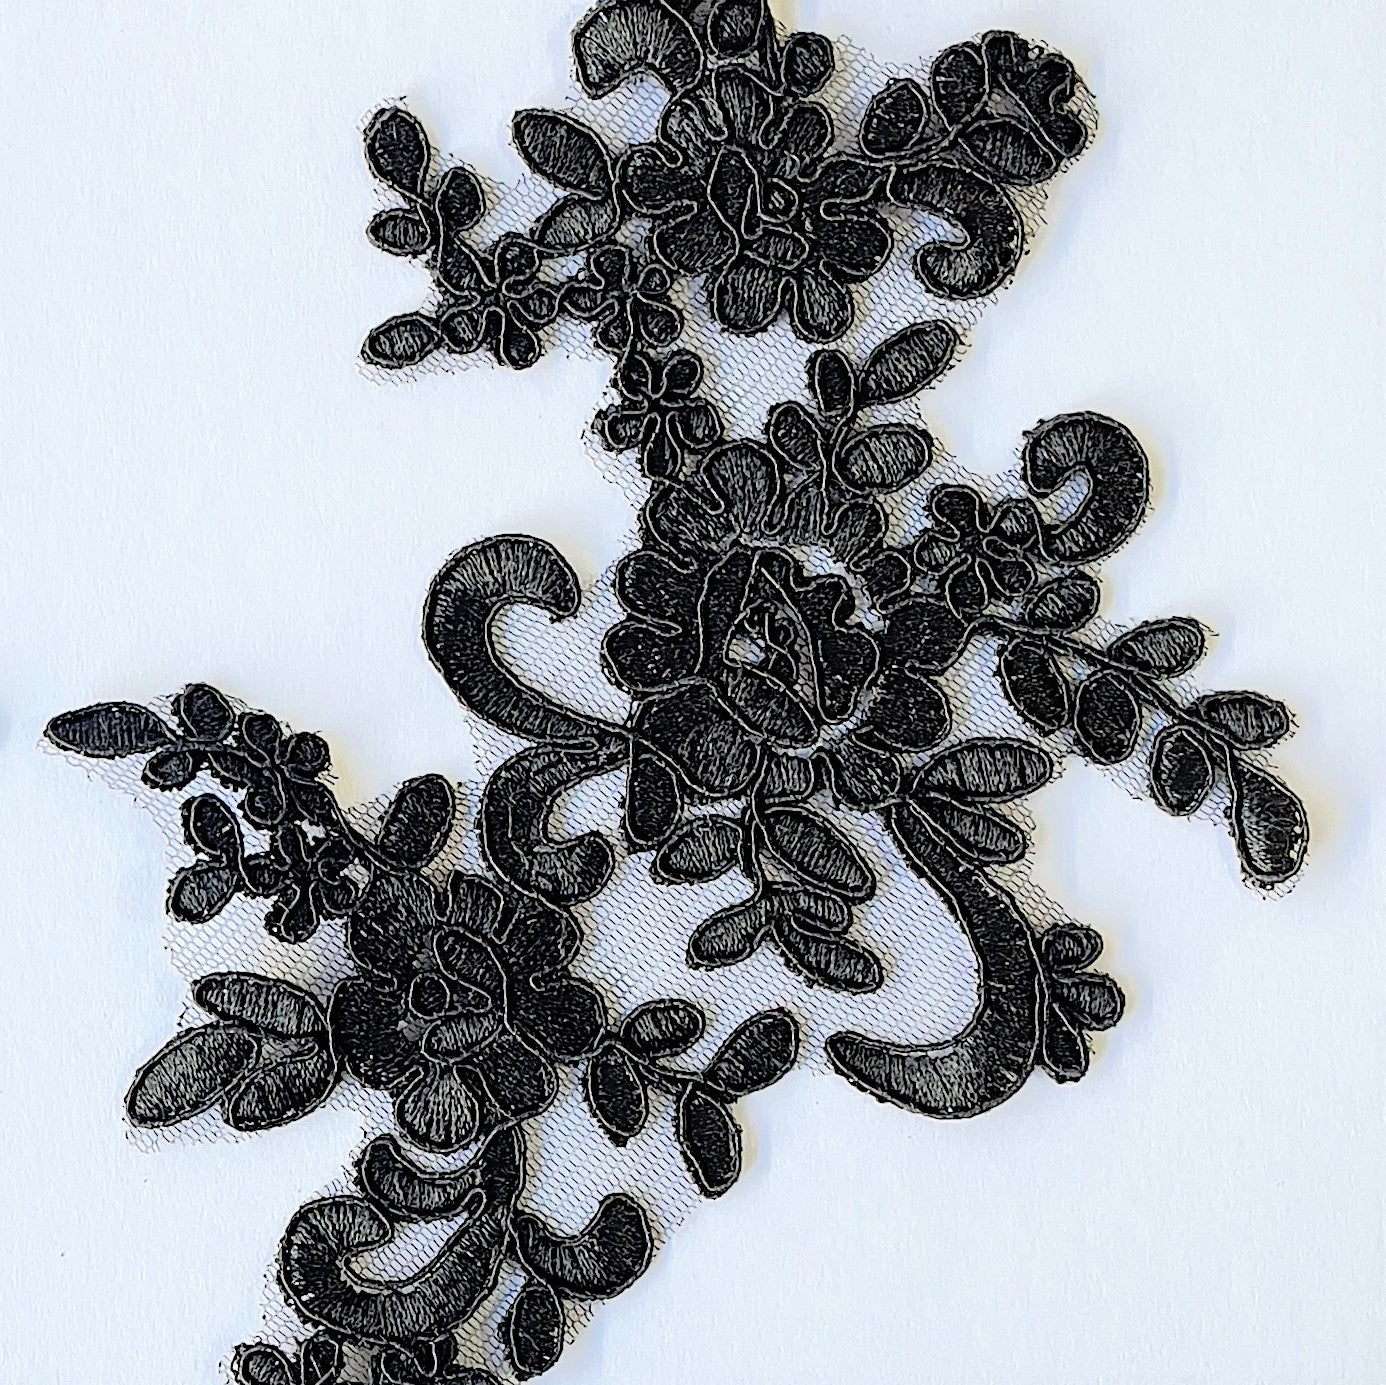 A closeup of the floral design of  the black corded lace applique .